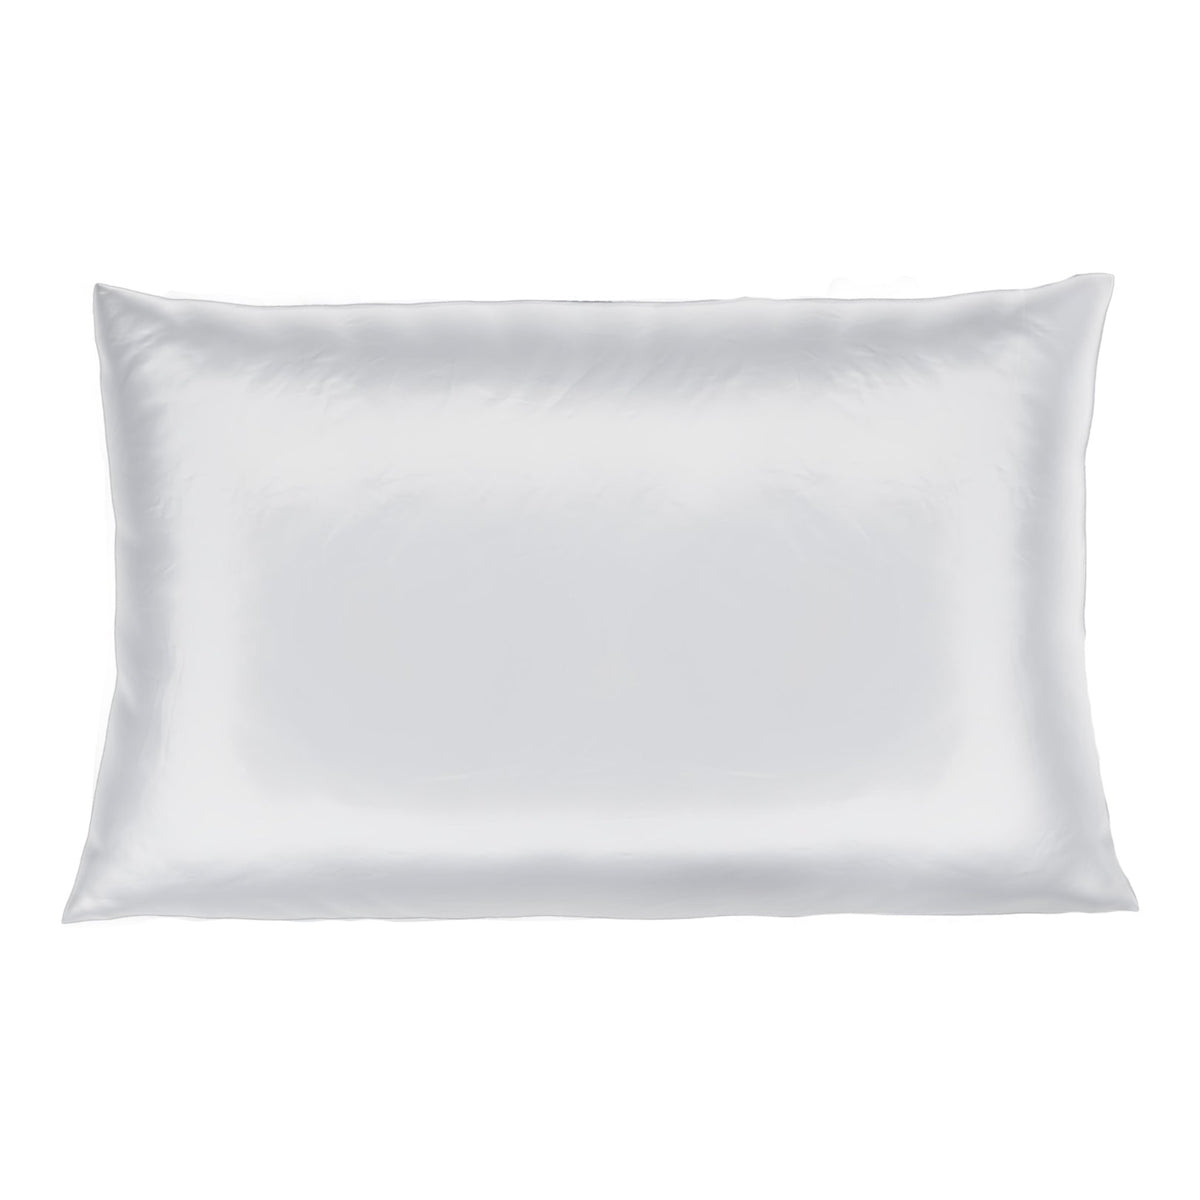 Mulberry Park Silks Deluxe 19 Momme Pure Silk Pillowcase in White Color